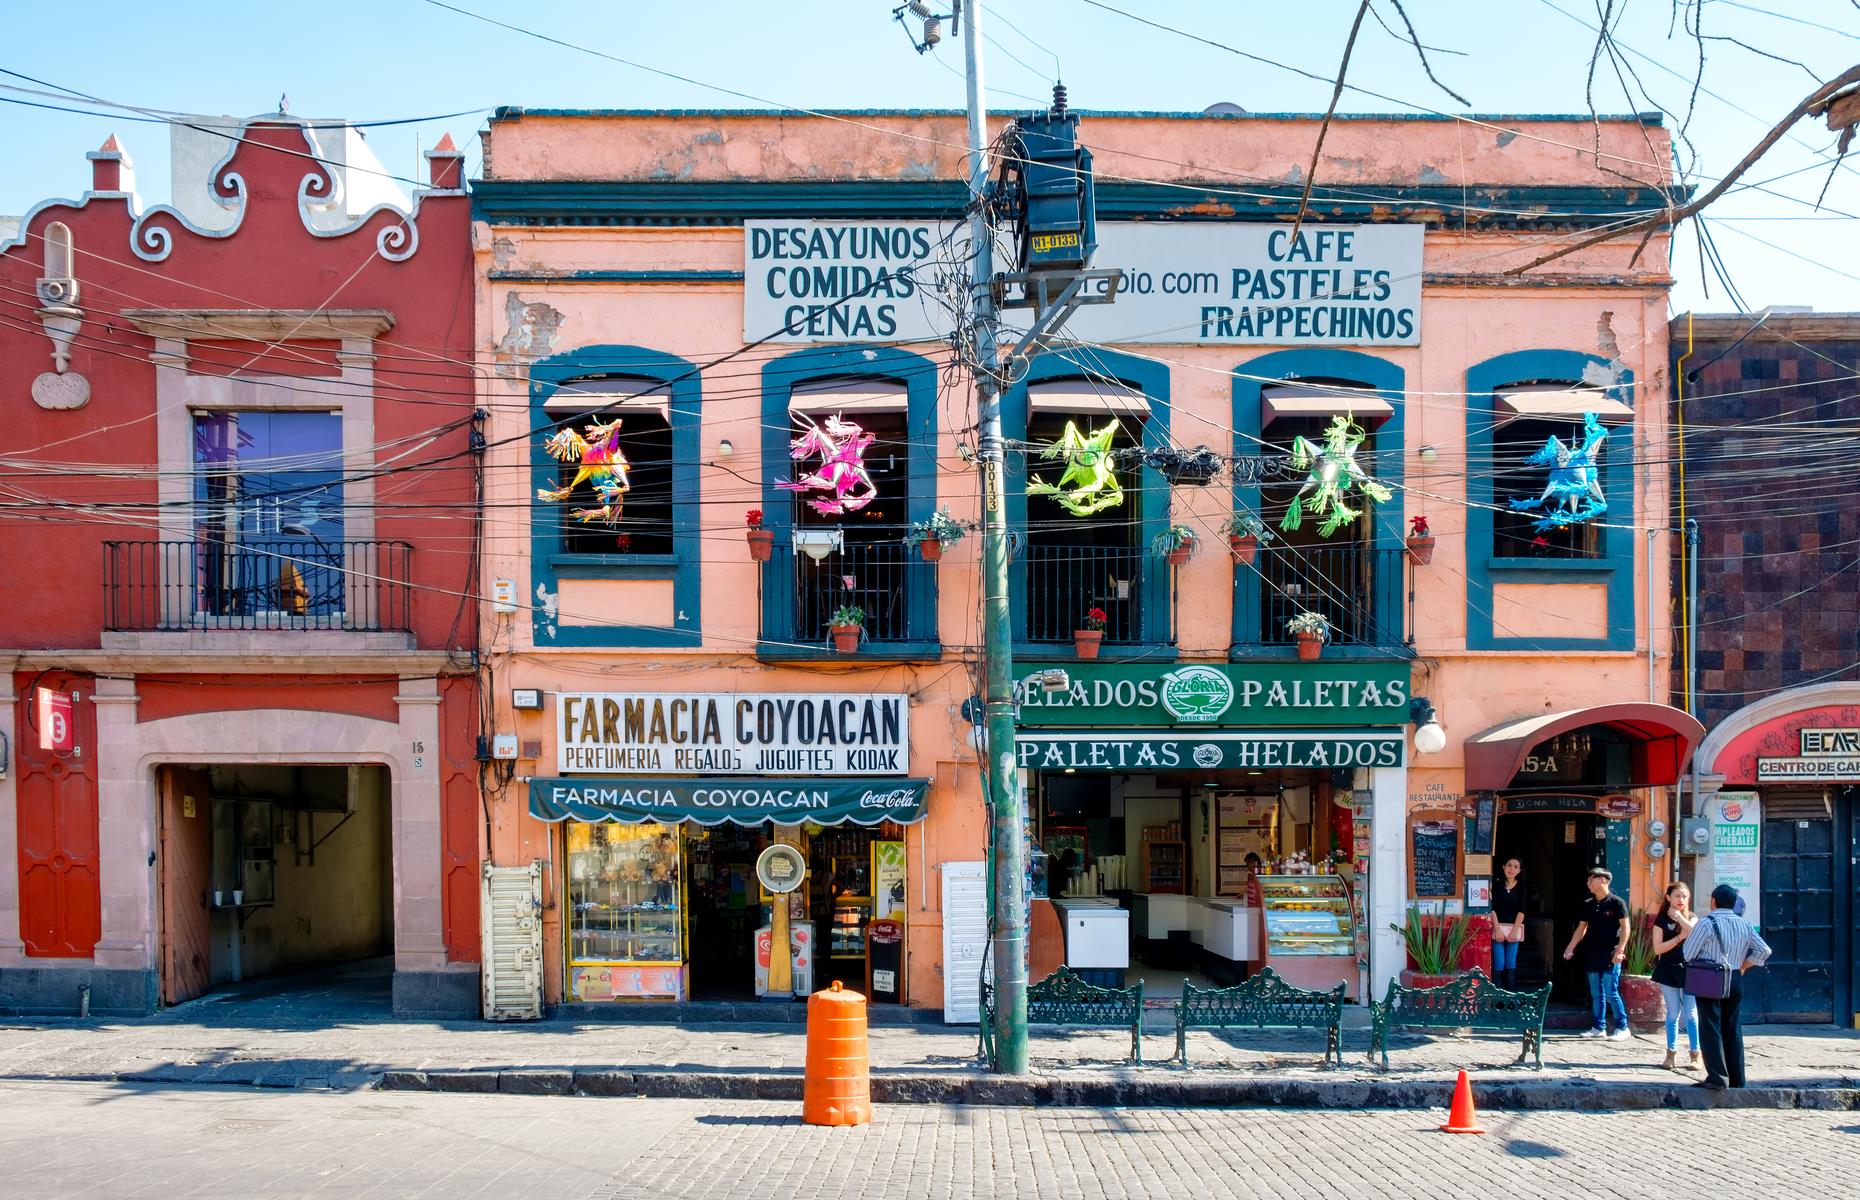 One of the 16 boroughs of Mexico City, Coyoacan is popular with tourists thanks to its historic center and art scene. Take some time to wander the streets and plazas, admire the architecture and lounge by the fountain. To experience a typical Mexican market, stop by Mercado de Coyoacan where you’ll be able to pick up some local handicrafts, souvenirs and street food.